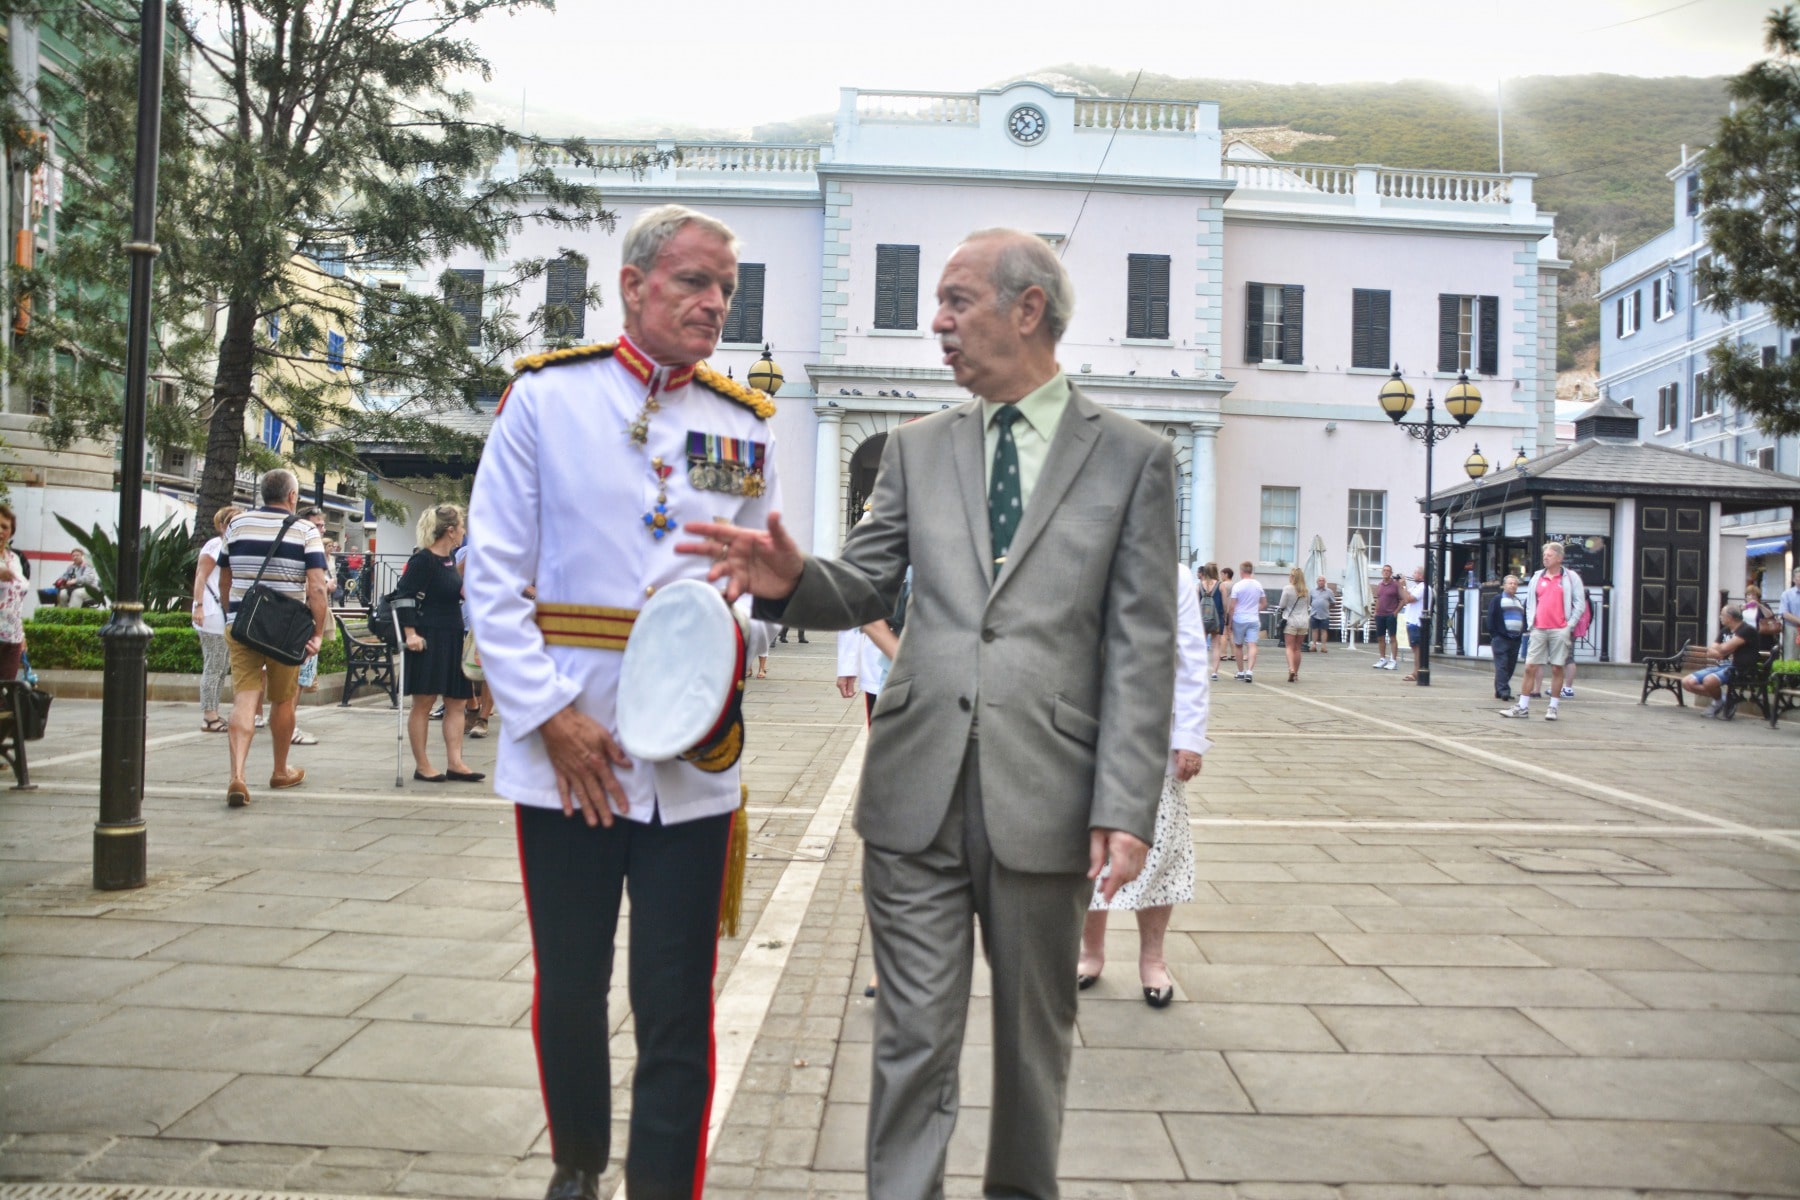 Gibraltar -28th September 2015 - The Governor of Gibraltar today departed From office bidding Farewell to politicians and the armed Forces in what ended up to be a low Key ceremony. A short farewell ceremony at the Parliament lobby was followed by a quick farewell at the city Hall, defer he inspected troops at the Naval Base. He then boarded HMC Seeker where a 17 gun salute bid him farrwell.